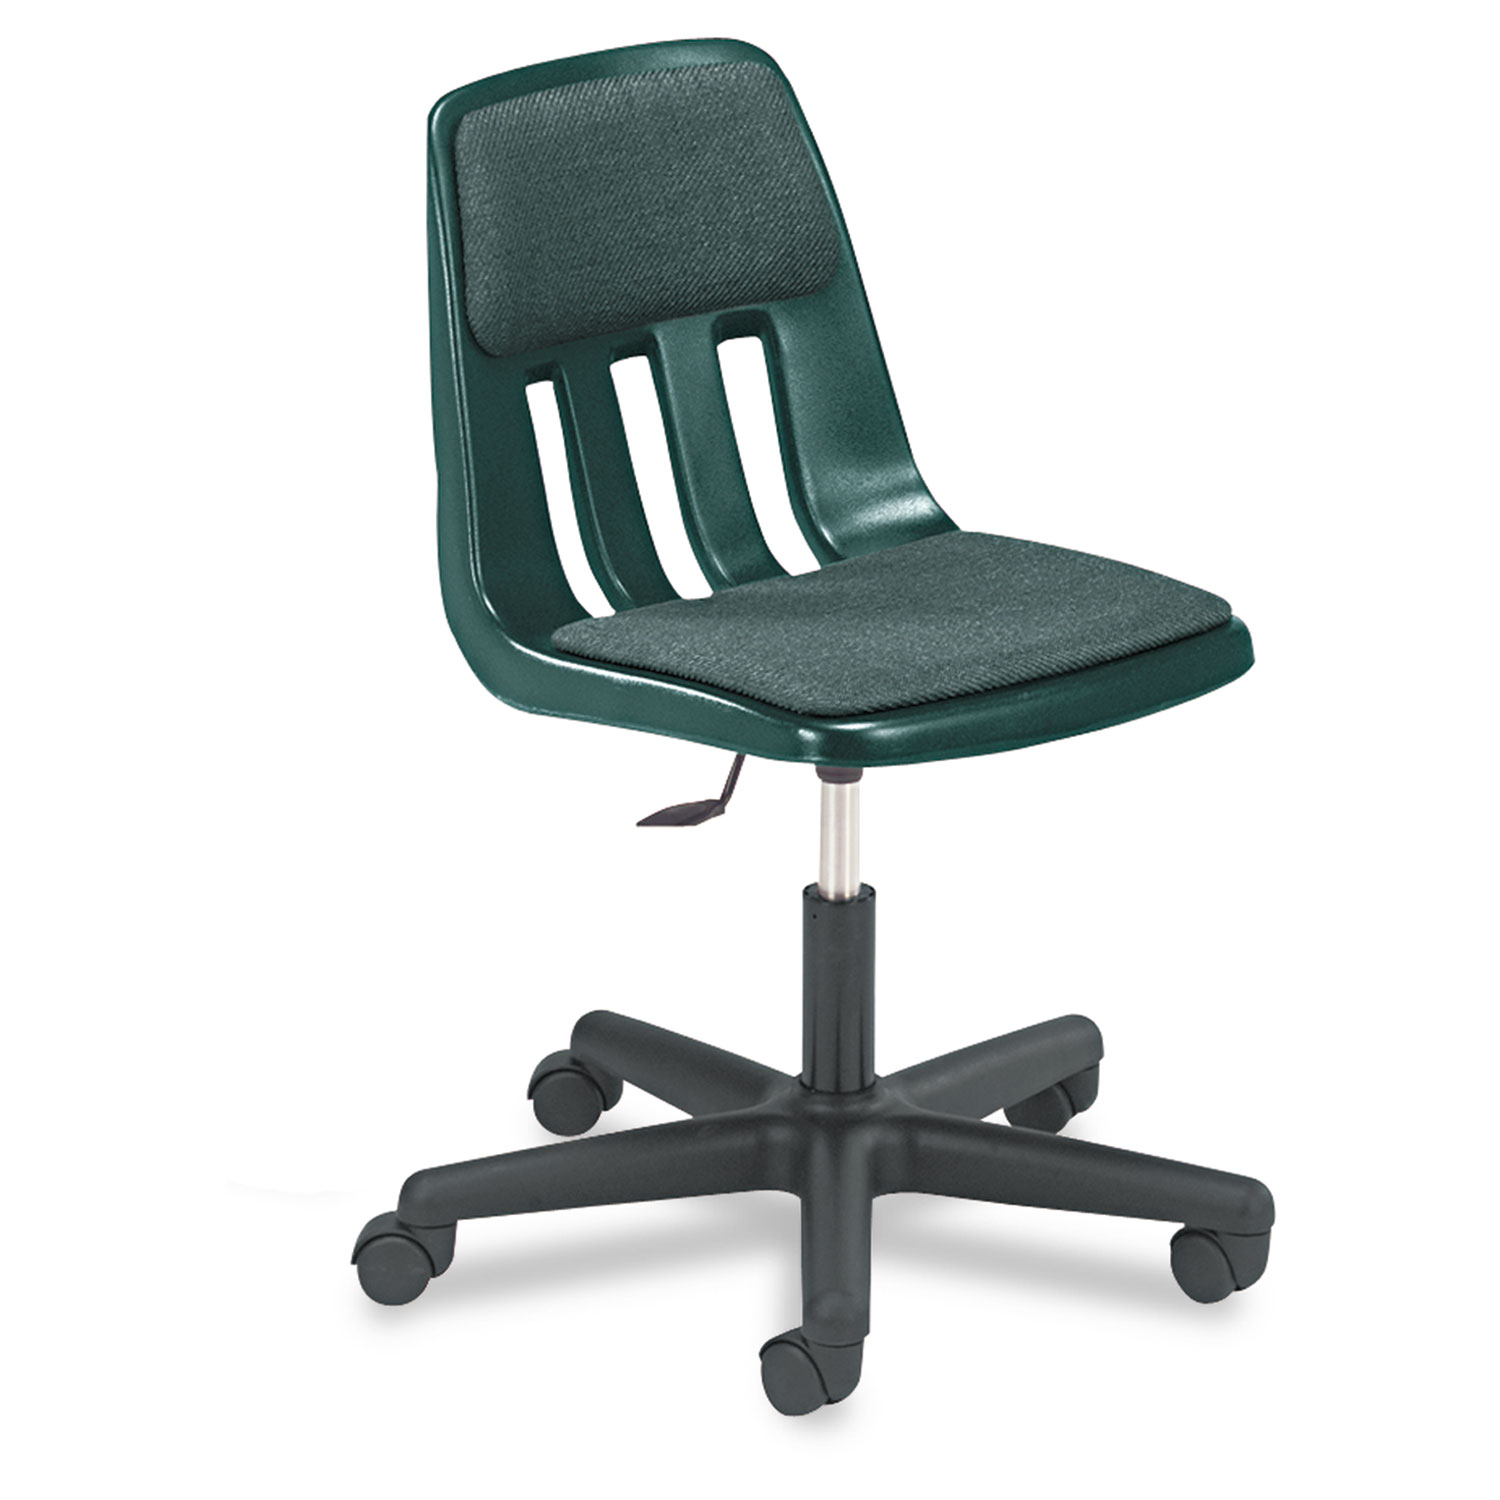 Height-Adjustable Padded Teachers Chair, 25w x 28-1/4 to 33-3/8h, Forest Green